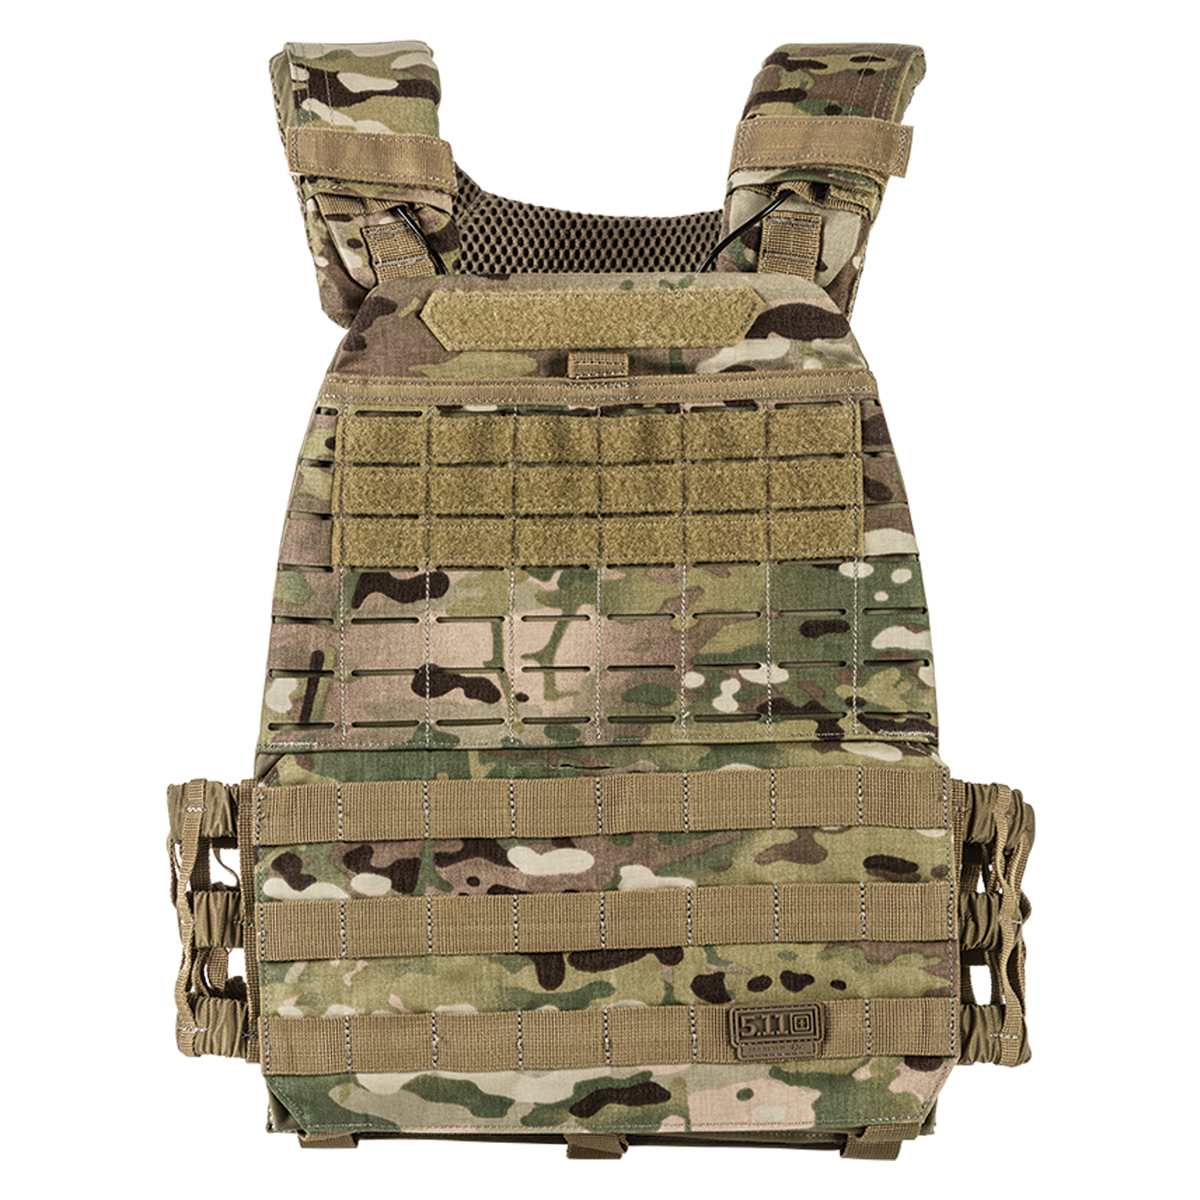 Simple Plate Carrier Workout Plates for Beginner